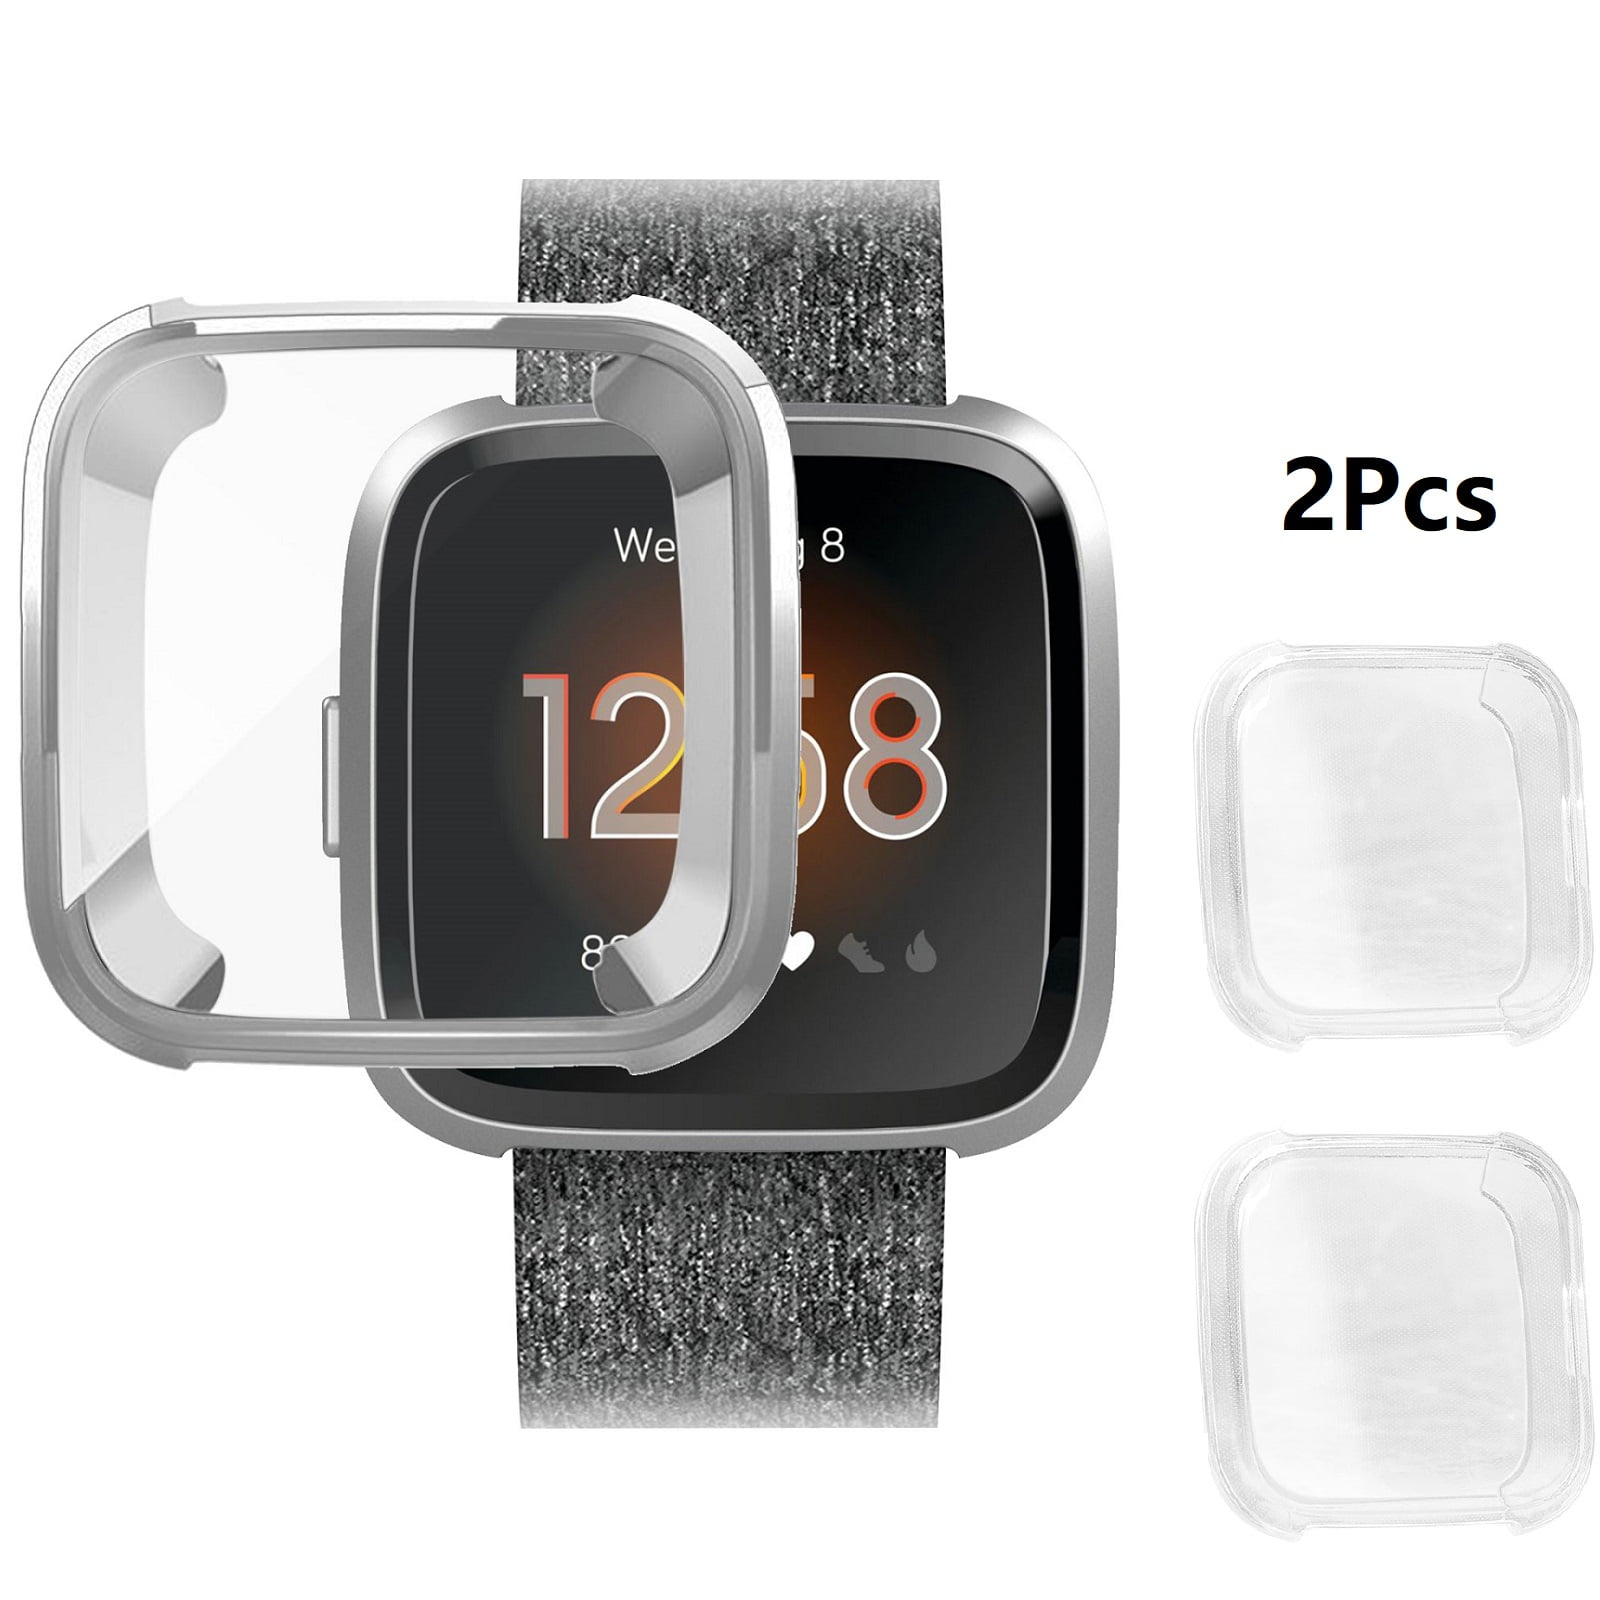 Silicone Protective TPU Shell Case Screen Protector Frame Cover for Fitbit Versa 